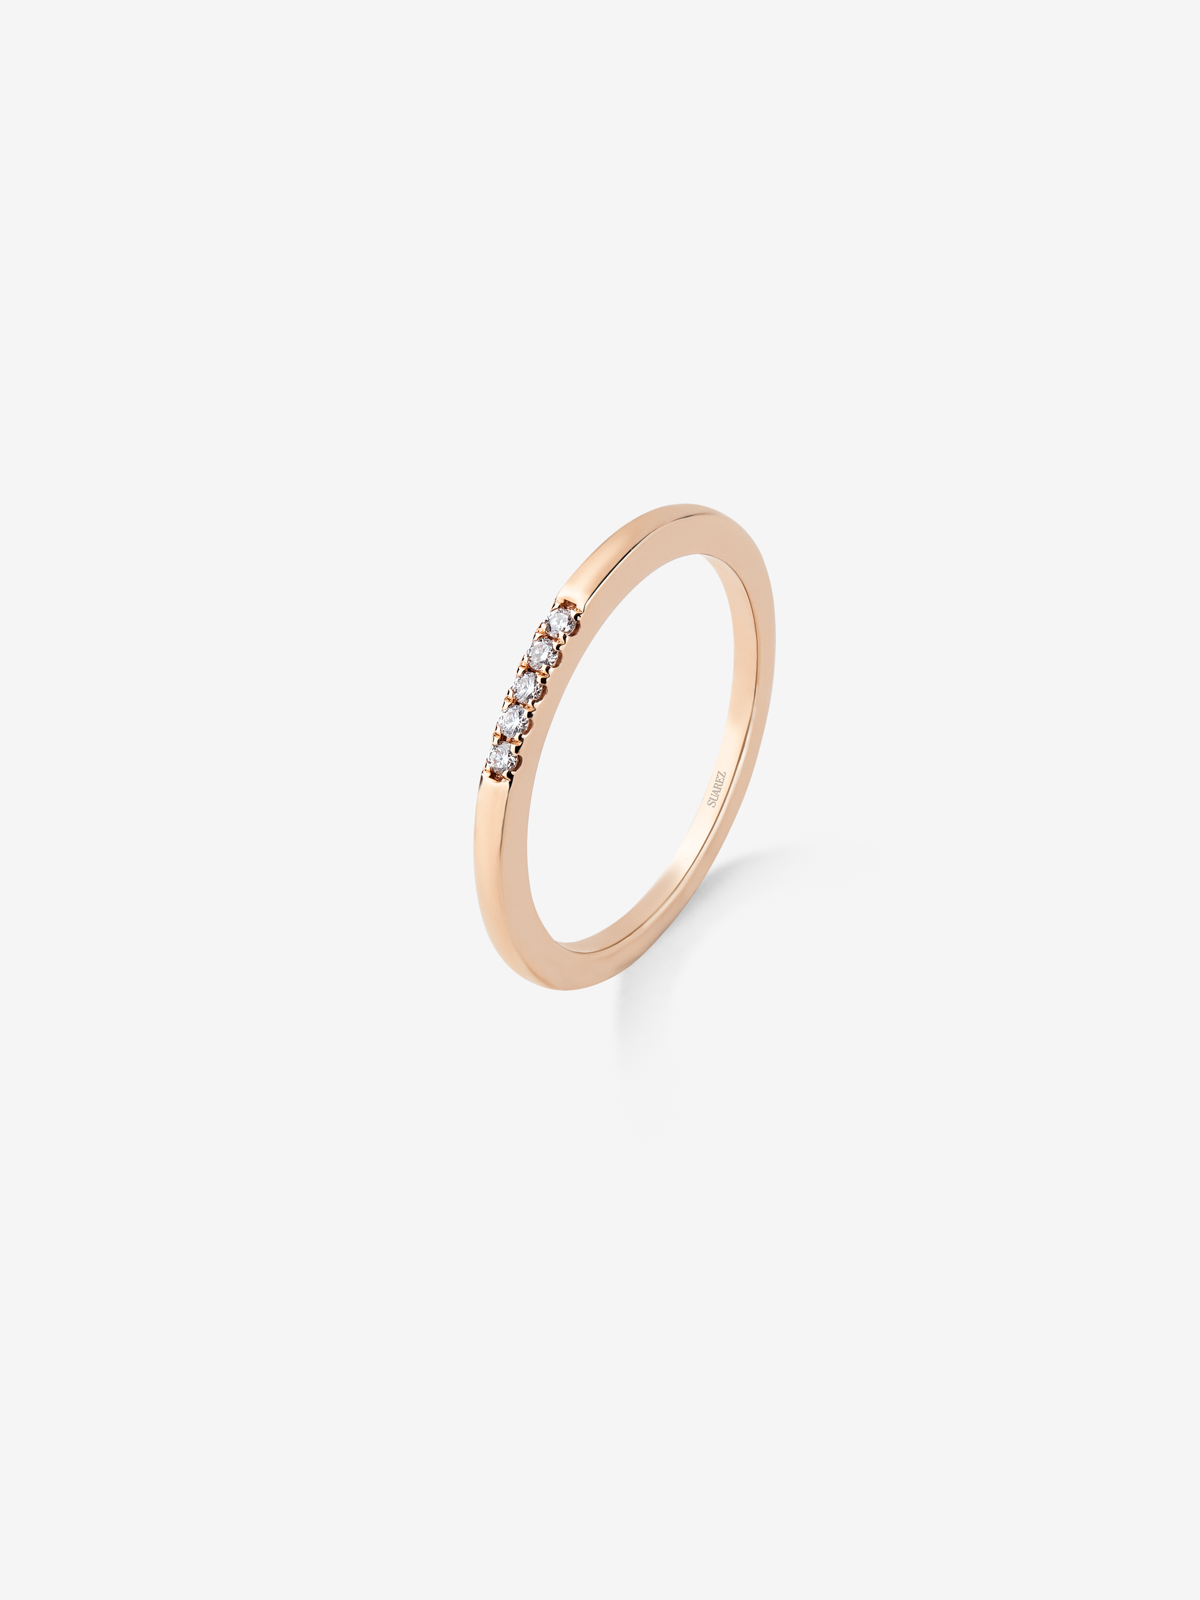 Thin 18K rose gold band ring with diamonds